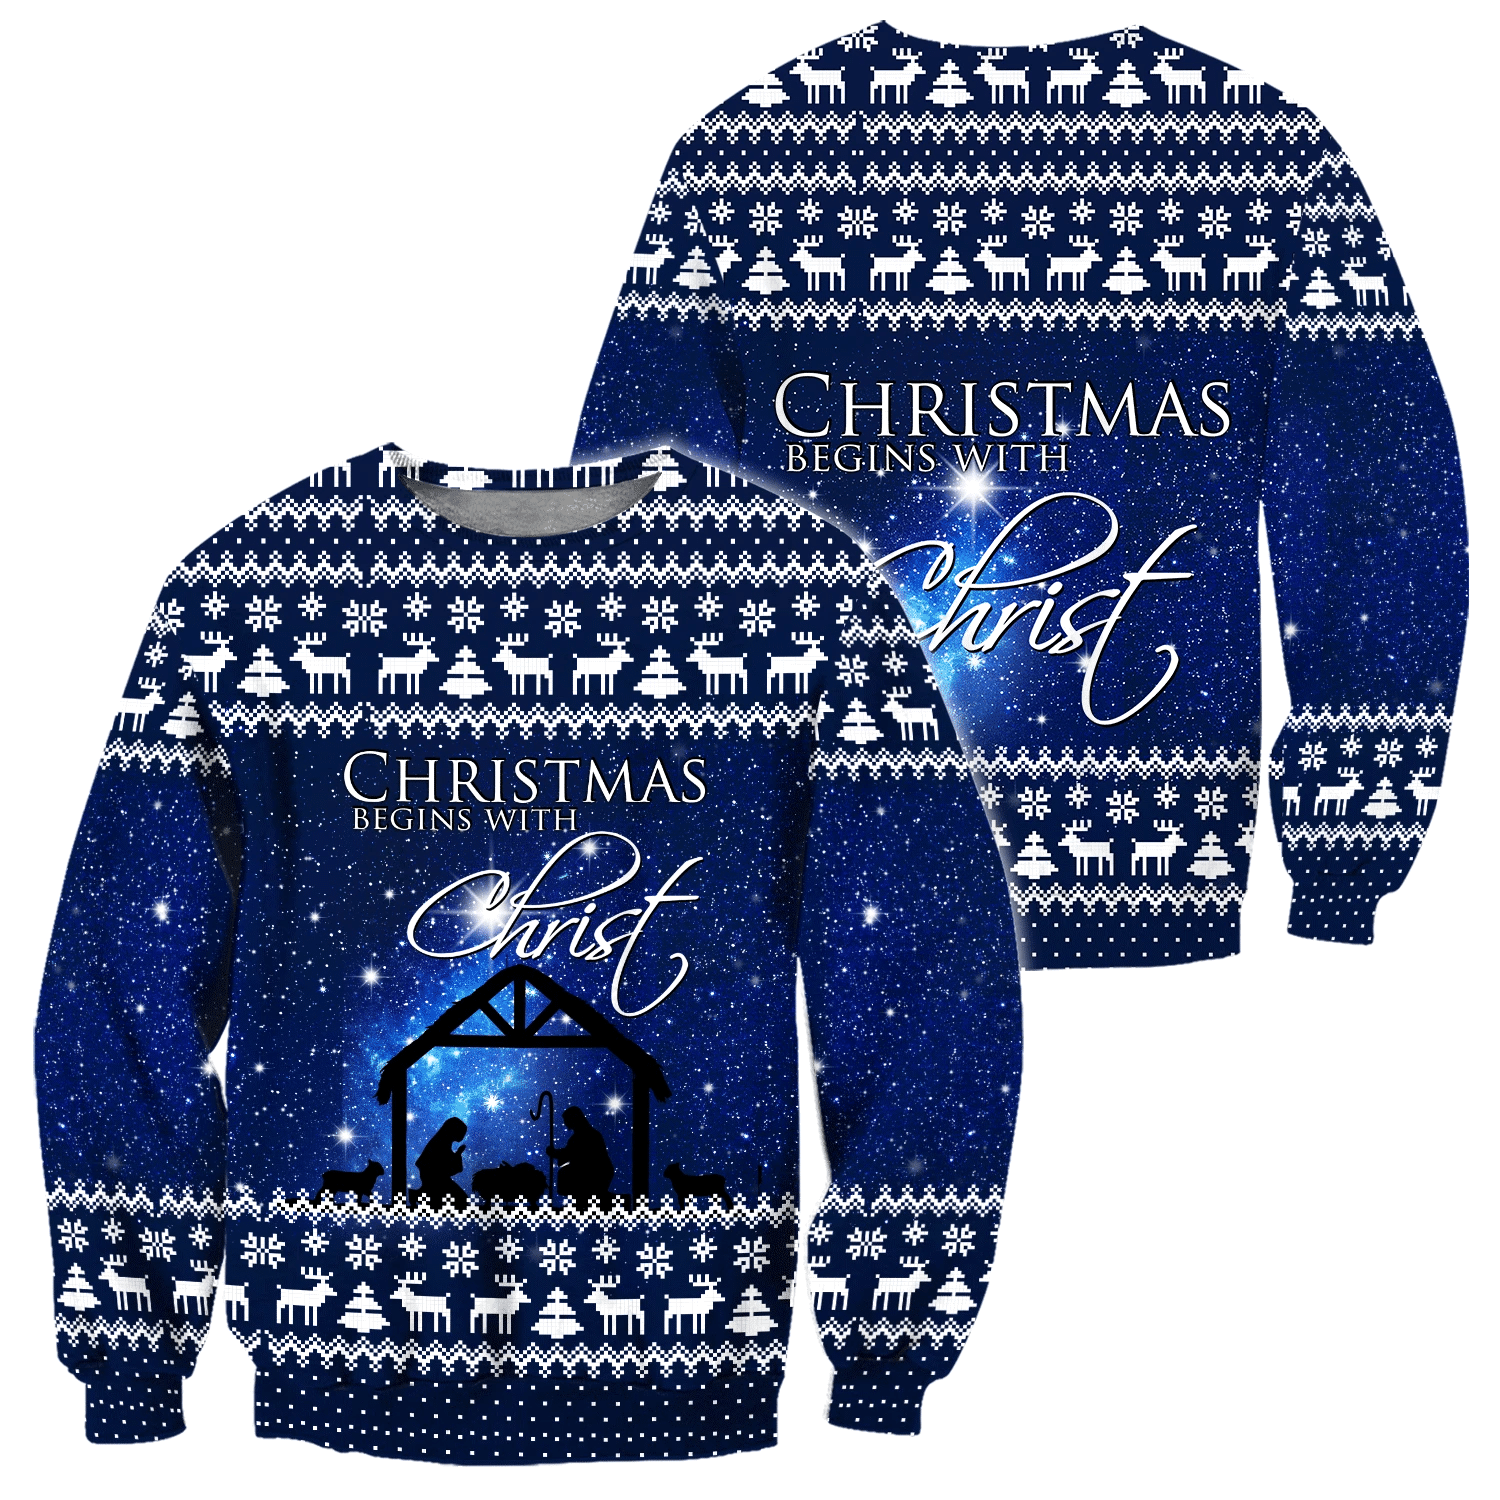 Christmas Begin With Christ All Over Print 3D Shirt Style: 3D Sweatshirt, Color: Blue